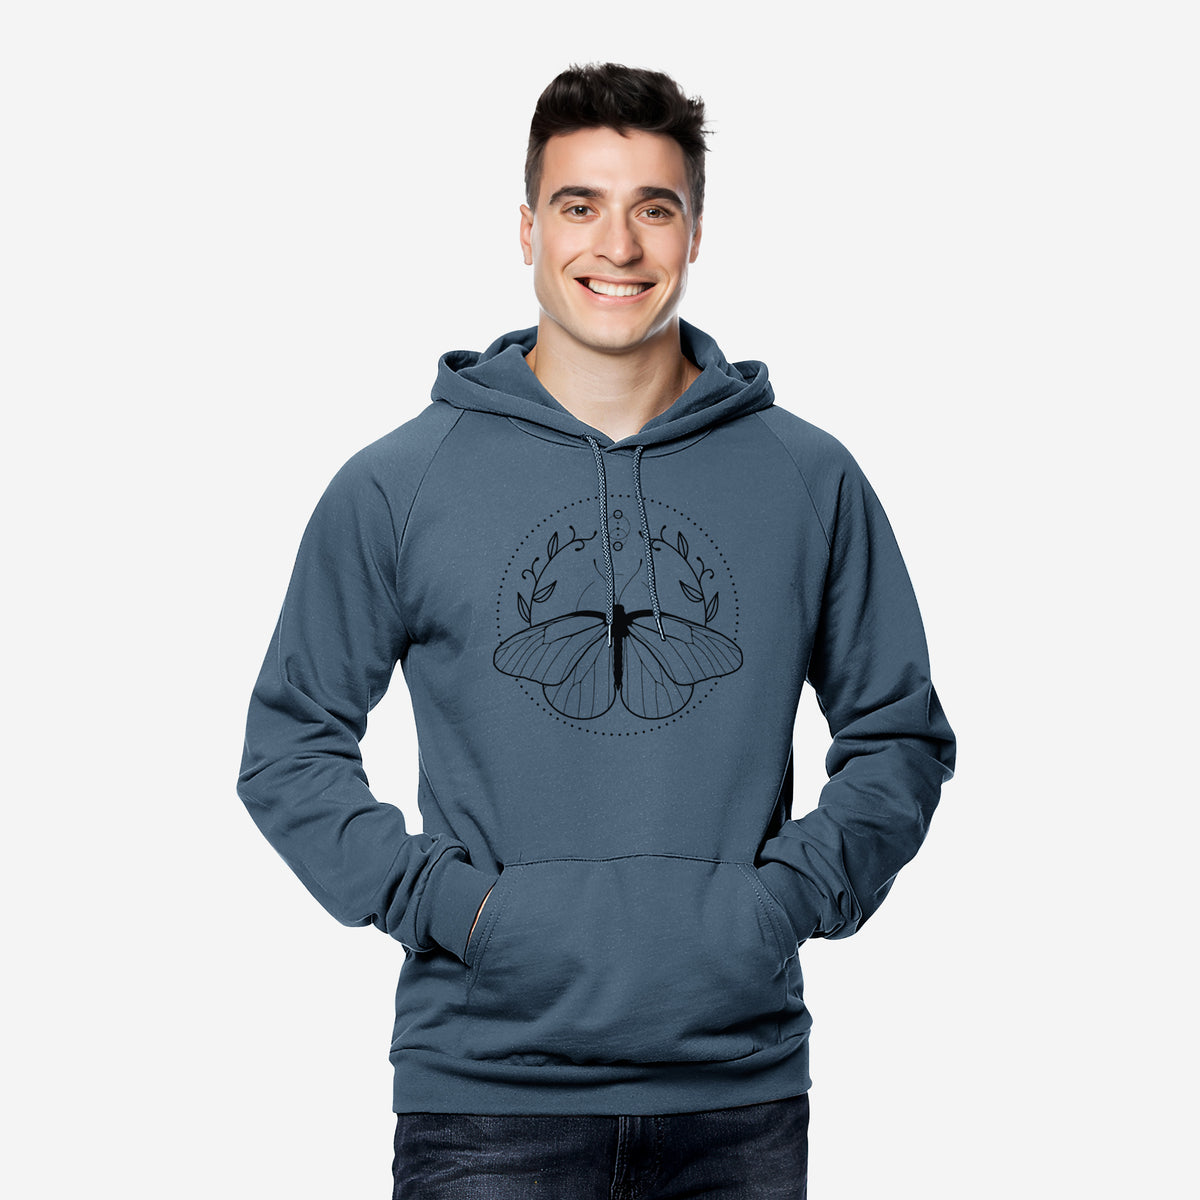 Aporia crataegi - Black Veined White Butterfly - Unisex Pullover Hoodie - Made in USA - 100% Organic Cotton